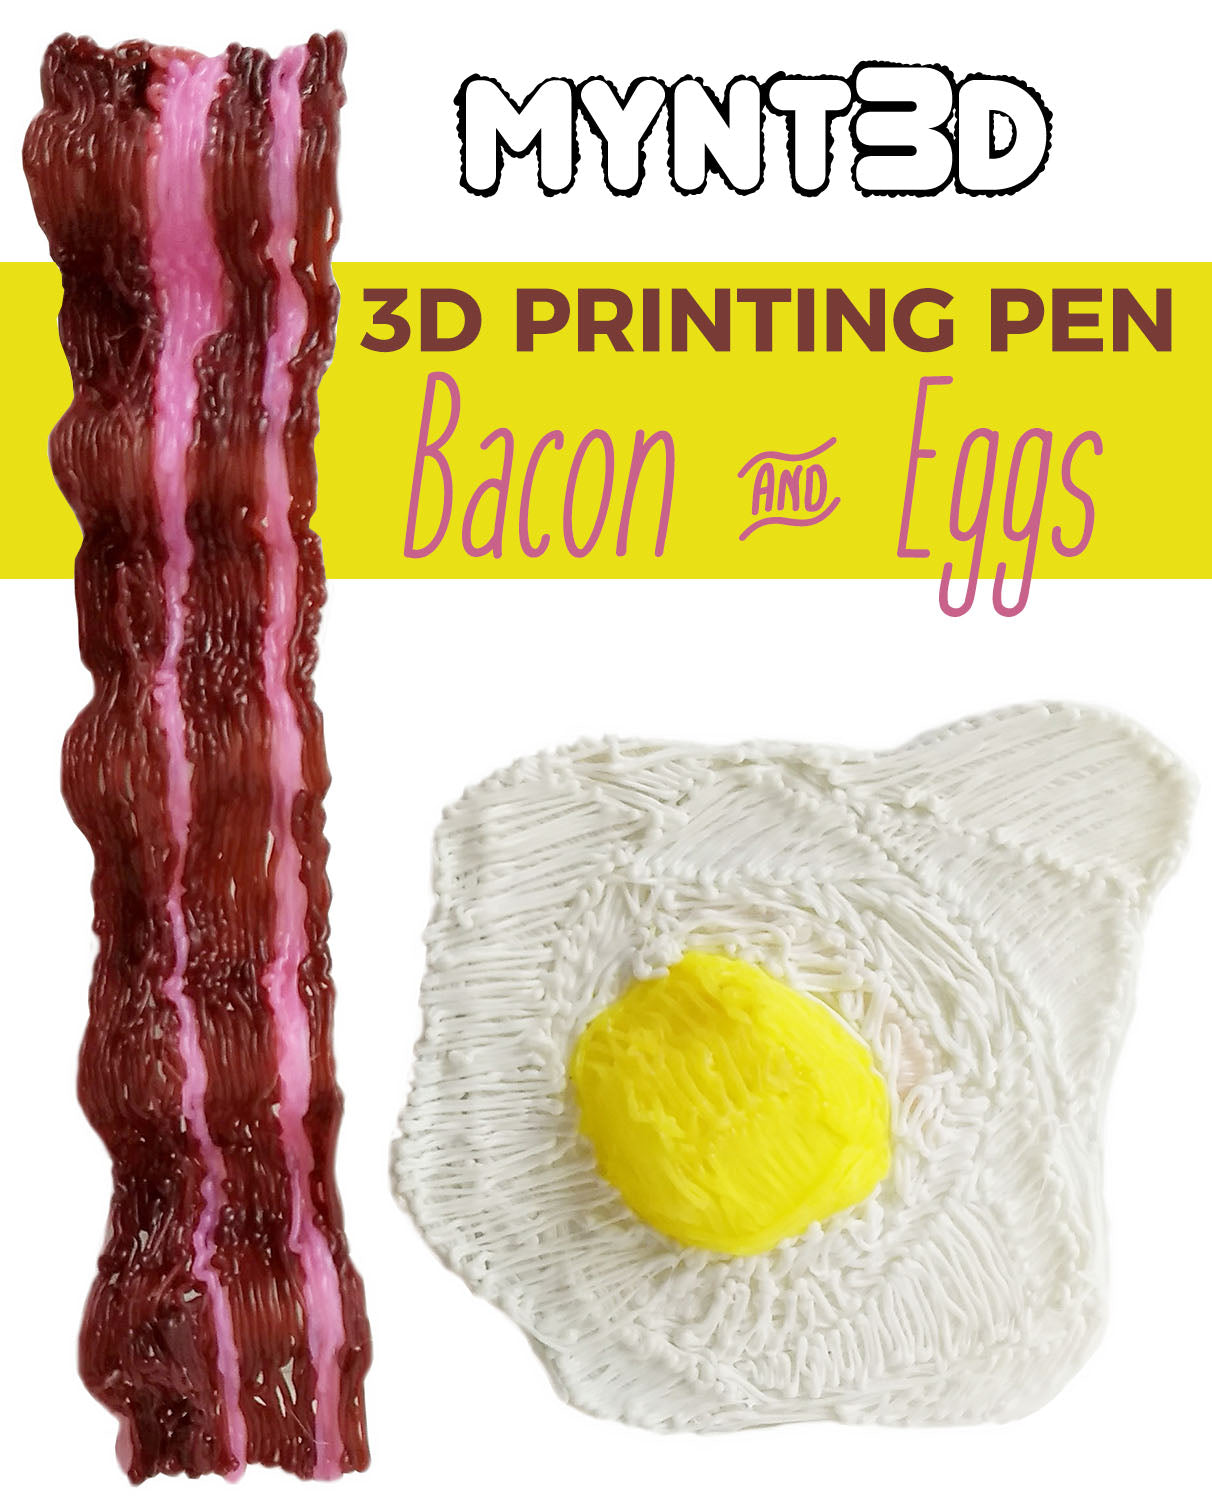 3D Pen Template and Technique for Drawing Bacon and Eggs